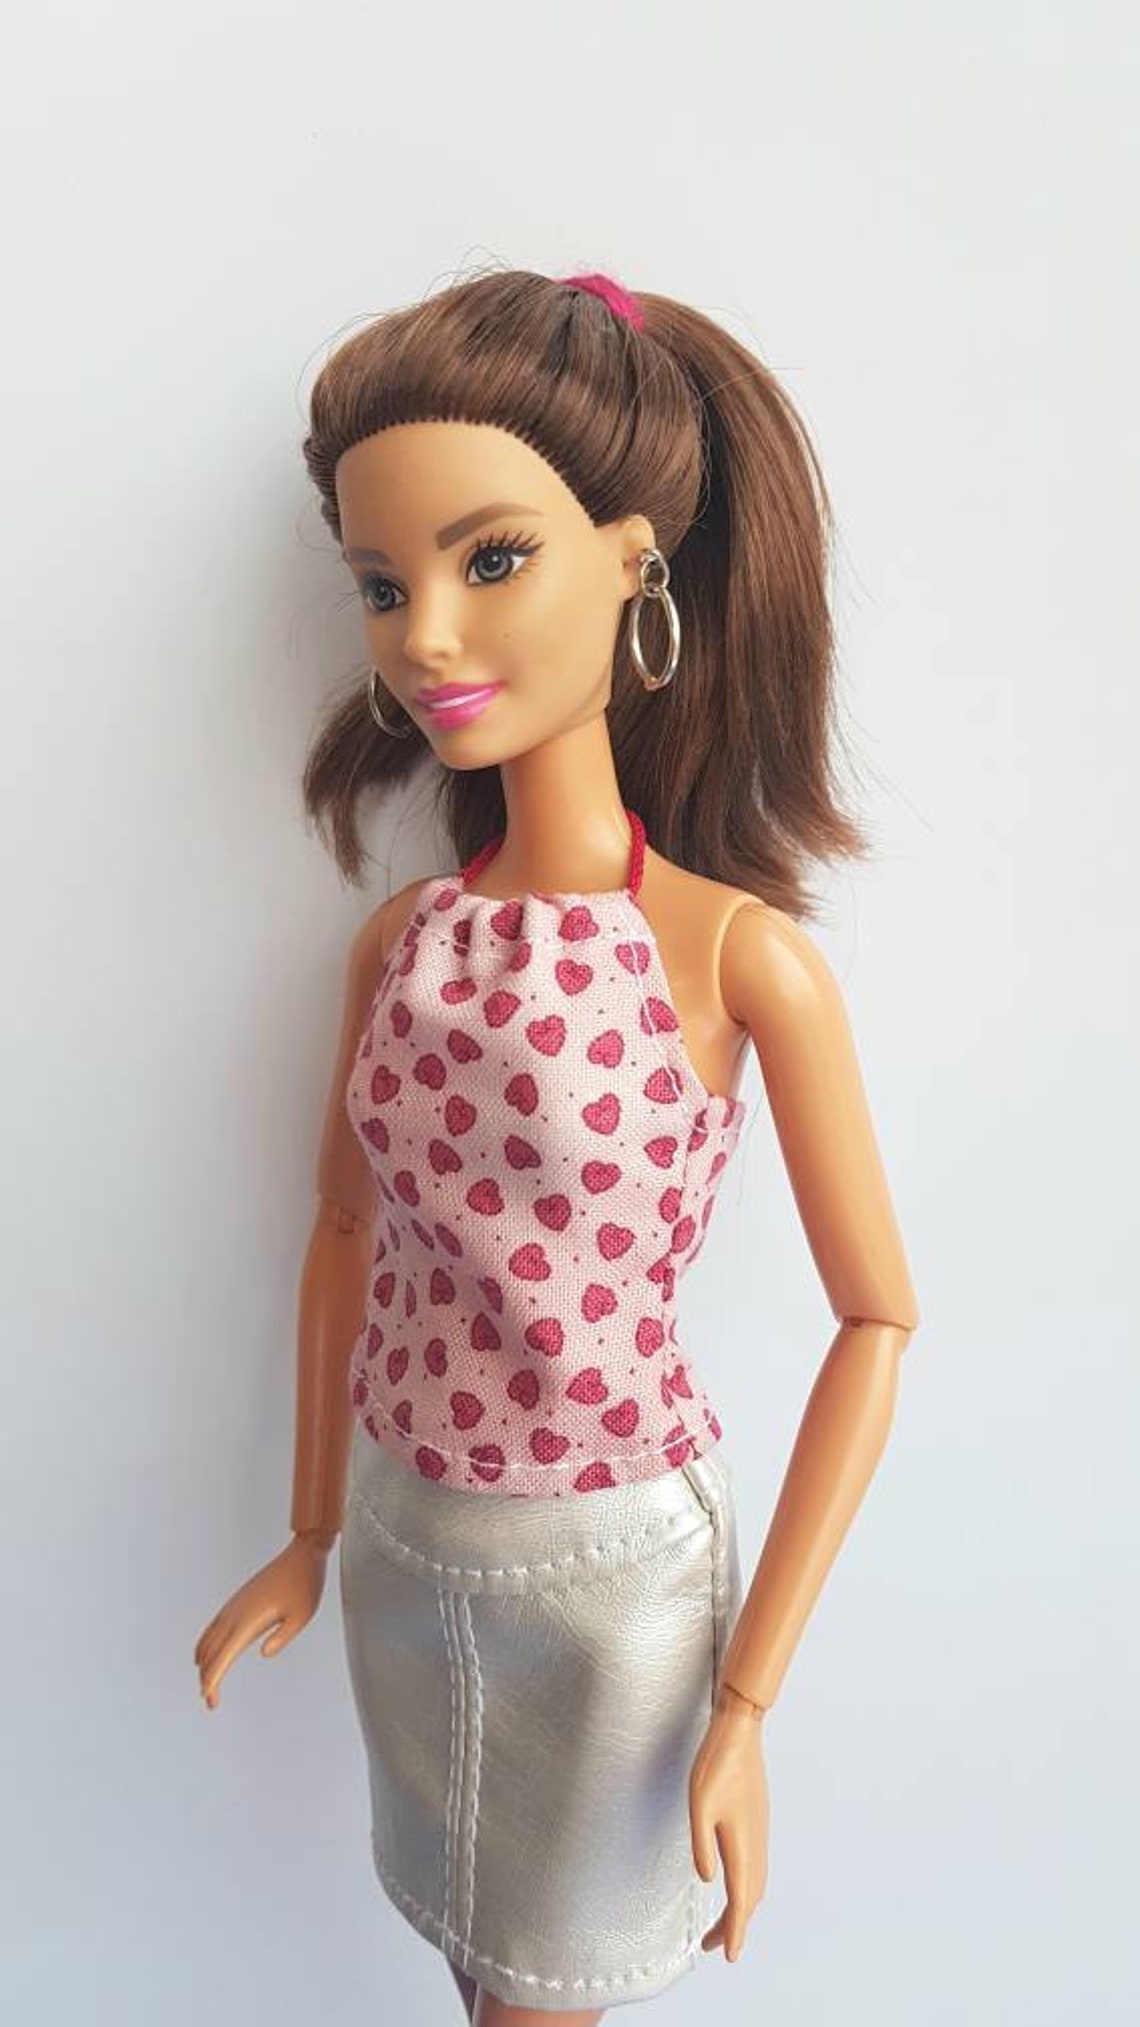 Crop top for Barbie doll Barbie doll clothes. | Etsy